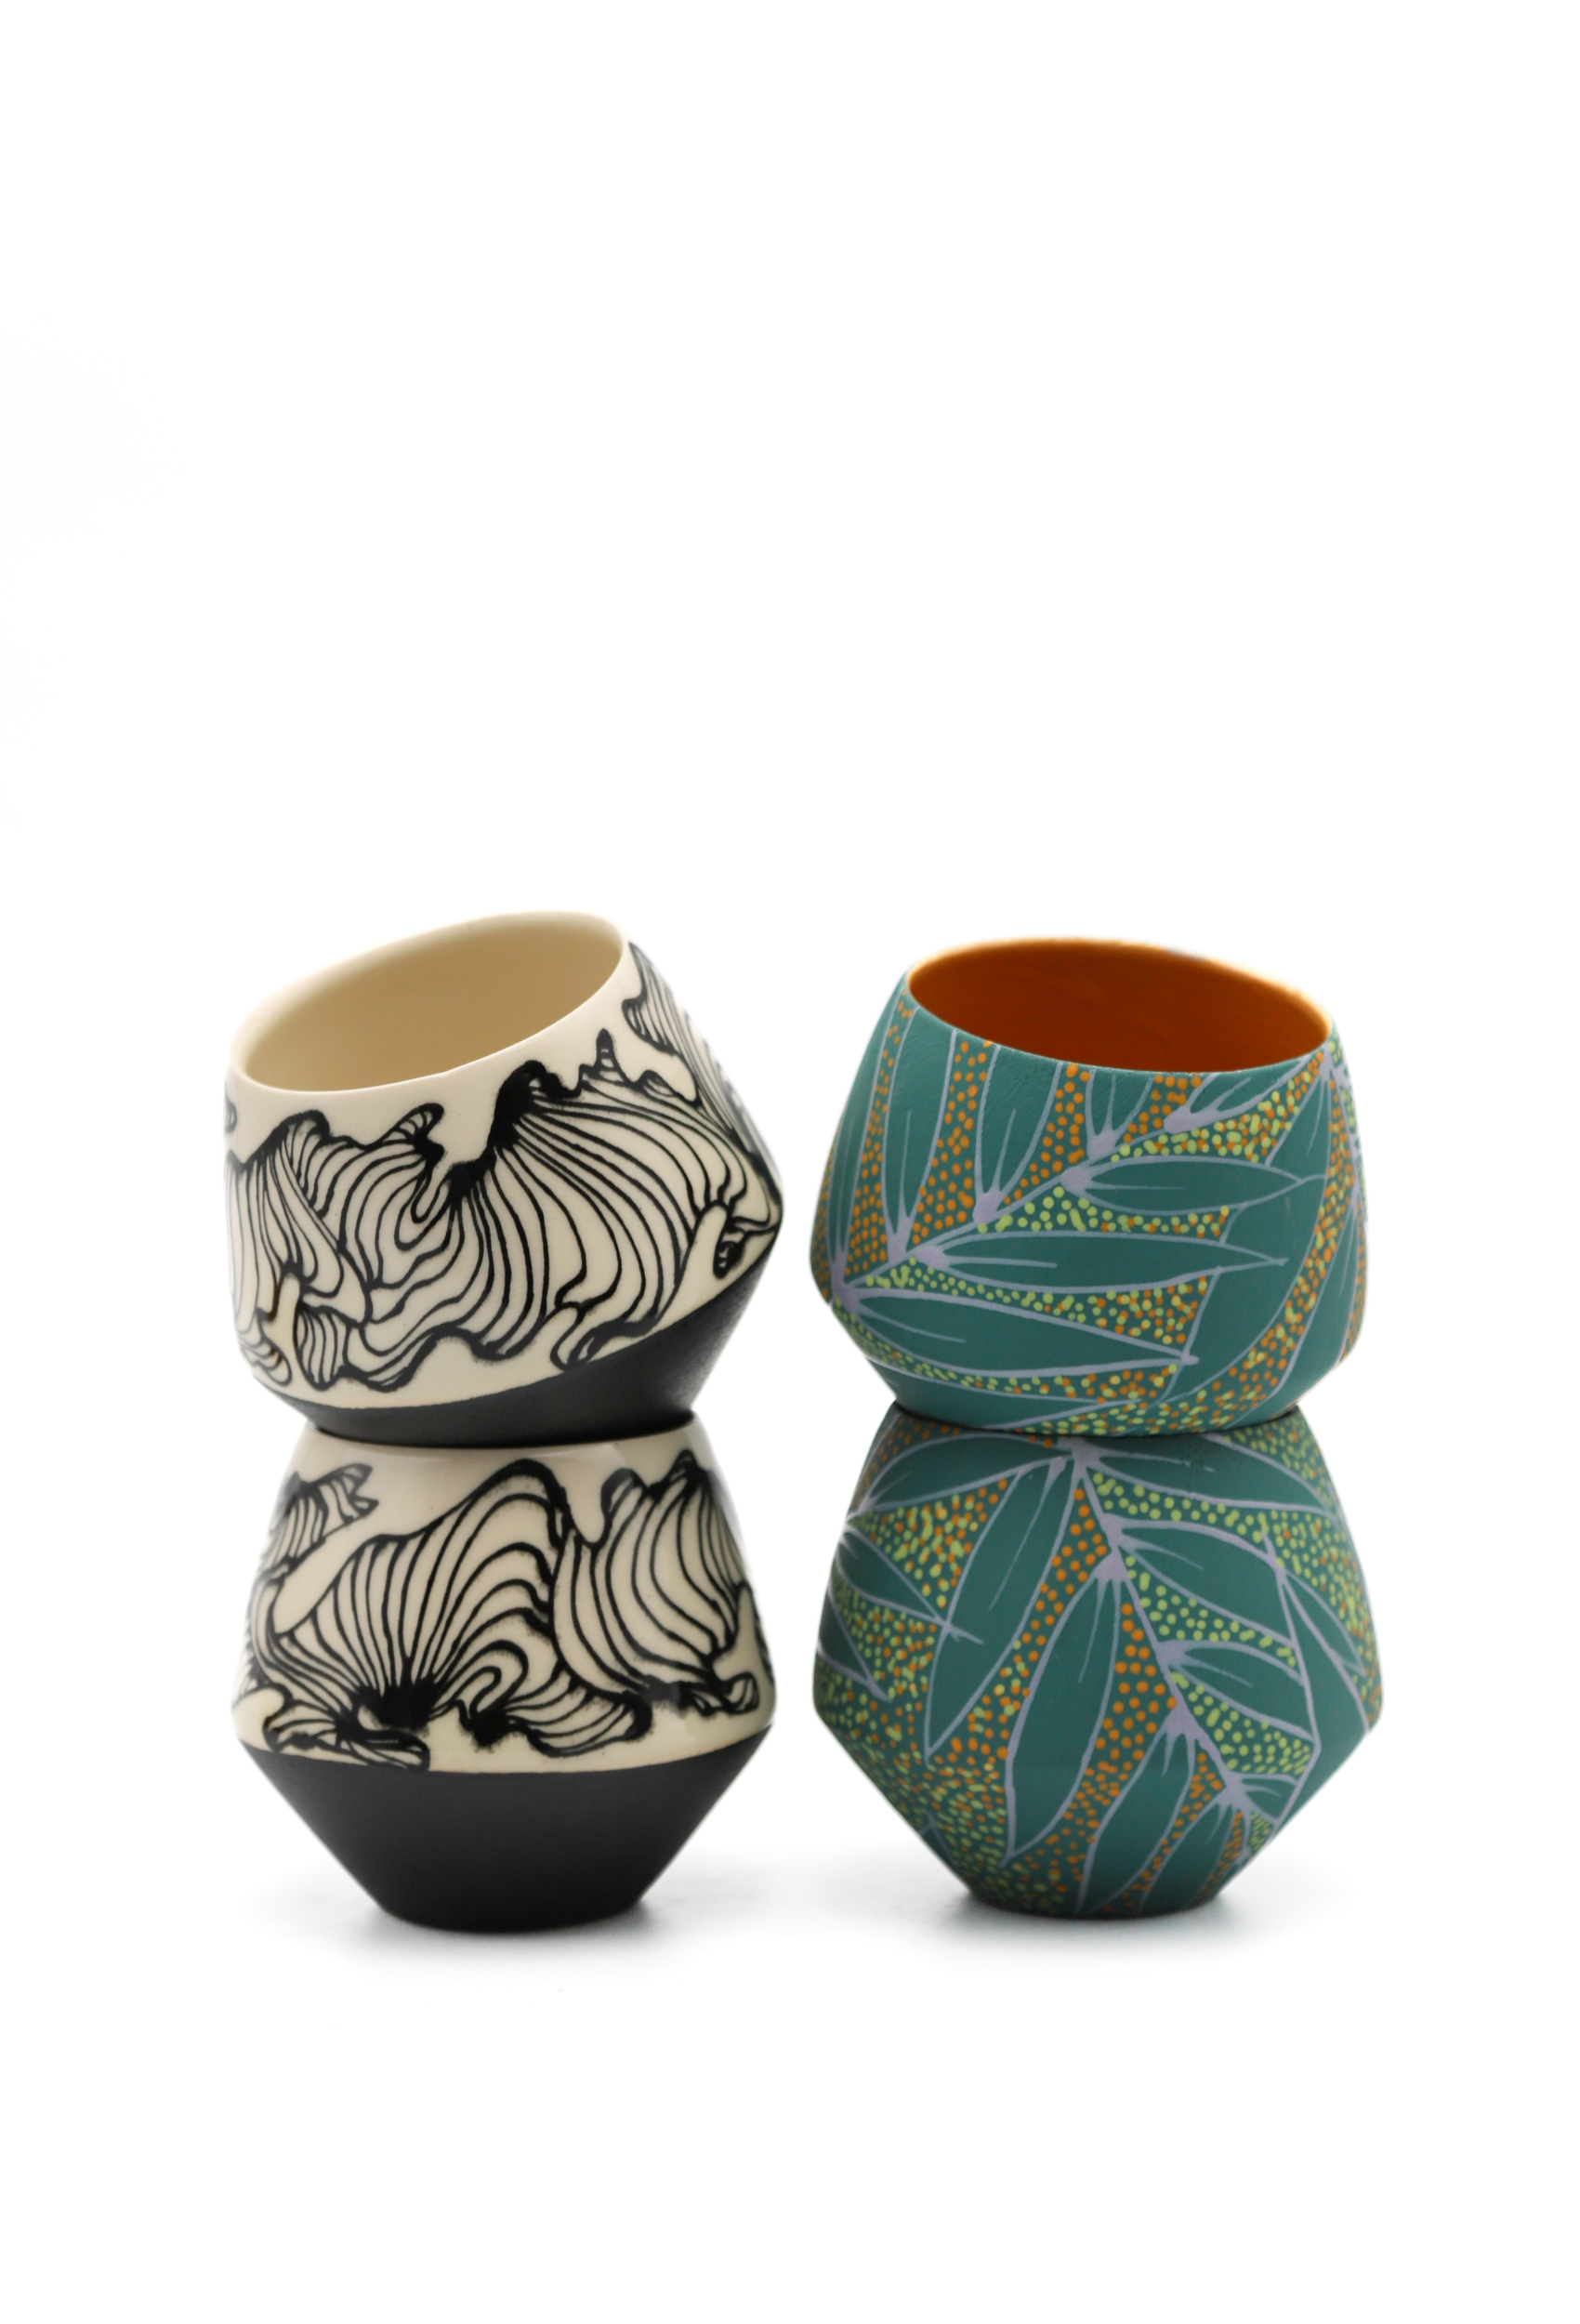 Two designs of cups stacked